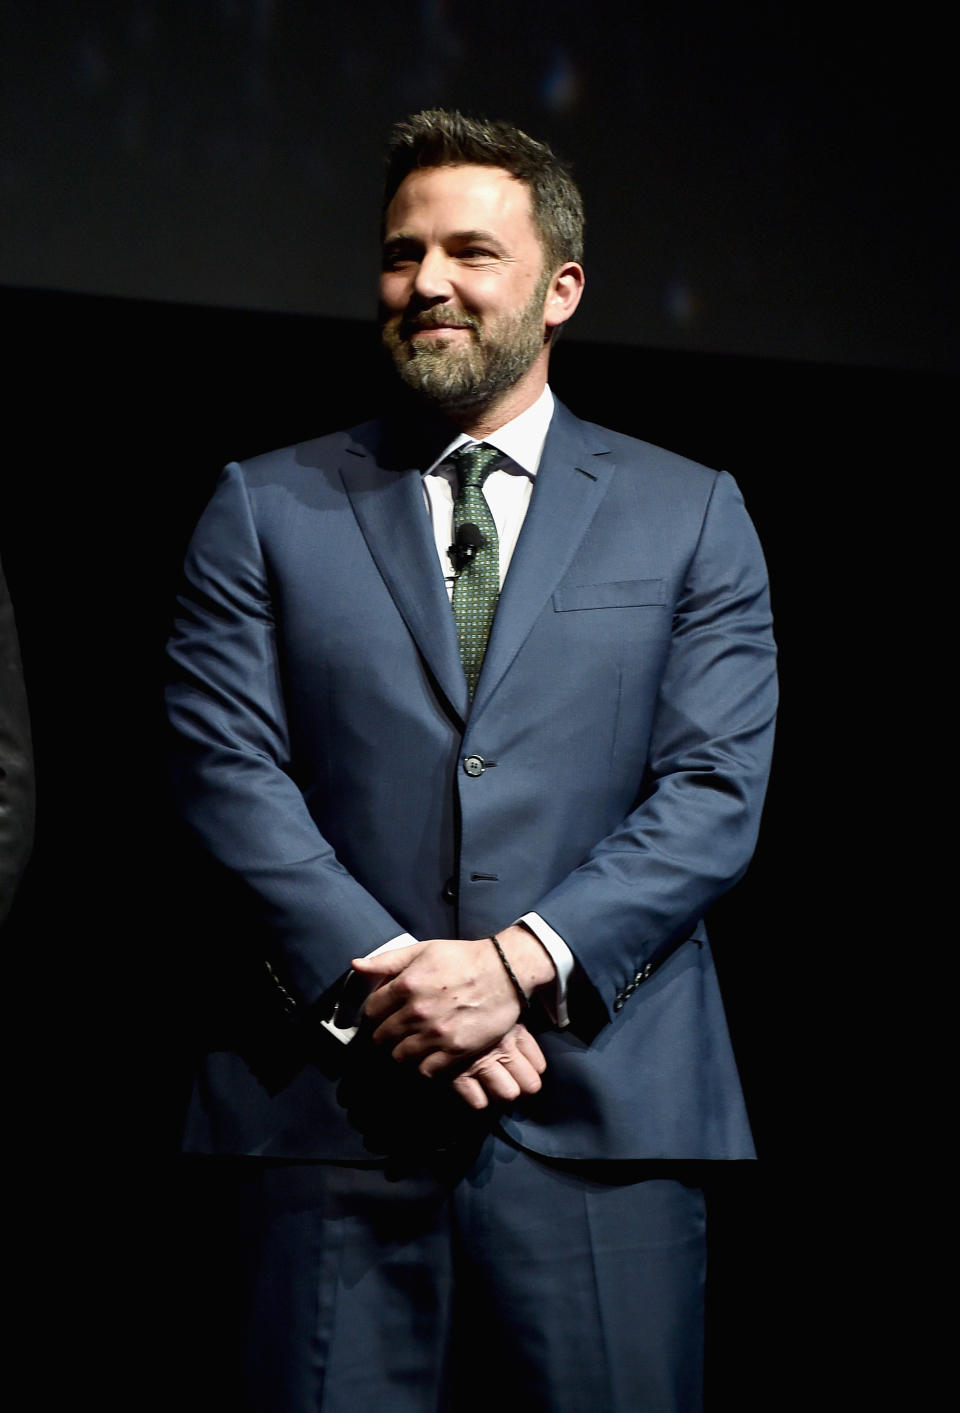 The actor’s weight is under scrutiny. ((Photo: Alberto E. Rodriguez/Getty Images for CinemaCon)